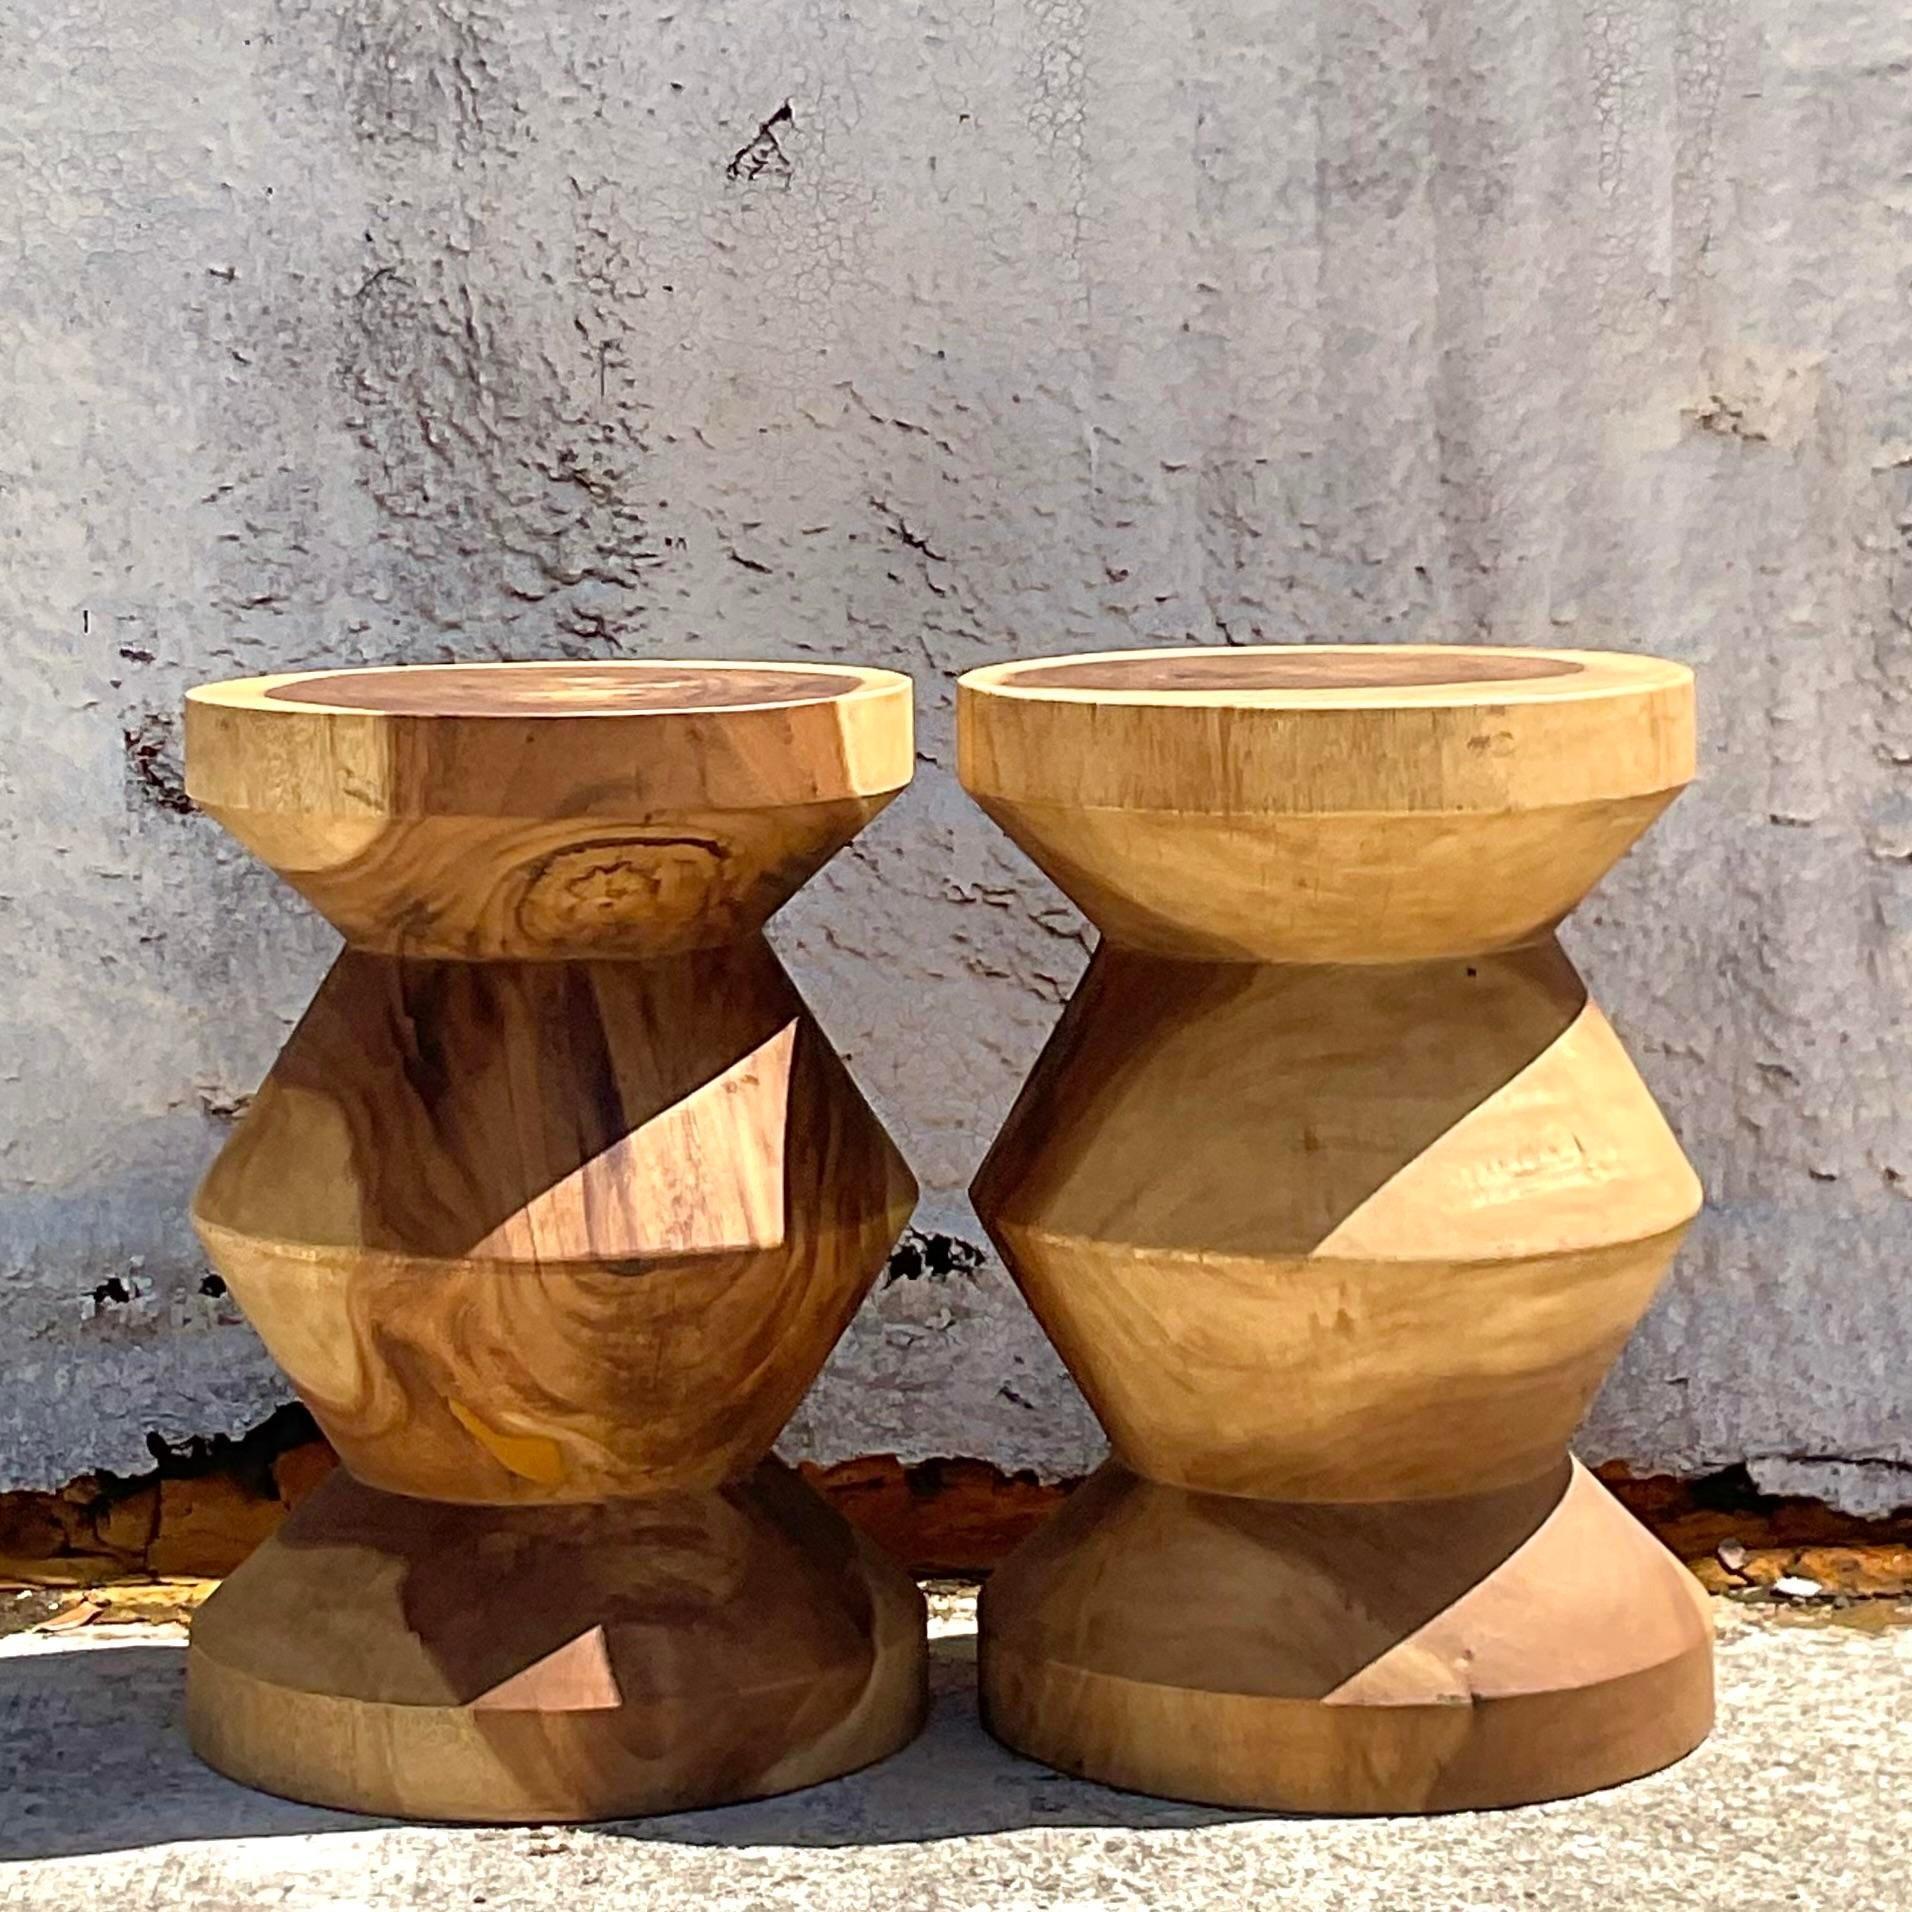 Philippine Vintage Boho Carved Stump Low Stool - a Pair For Sale